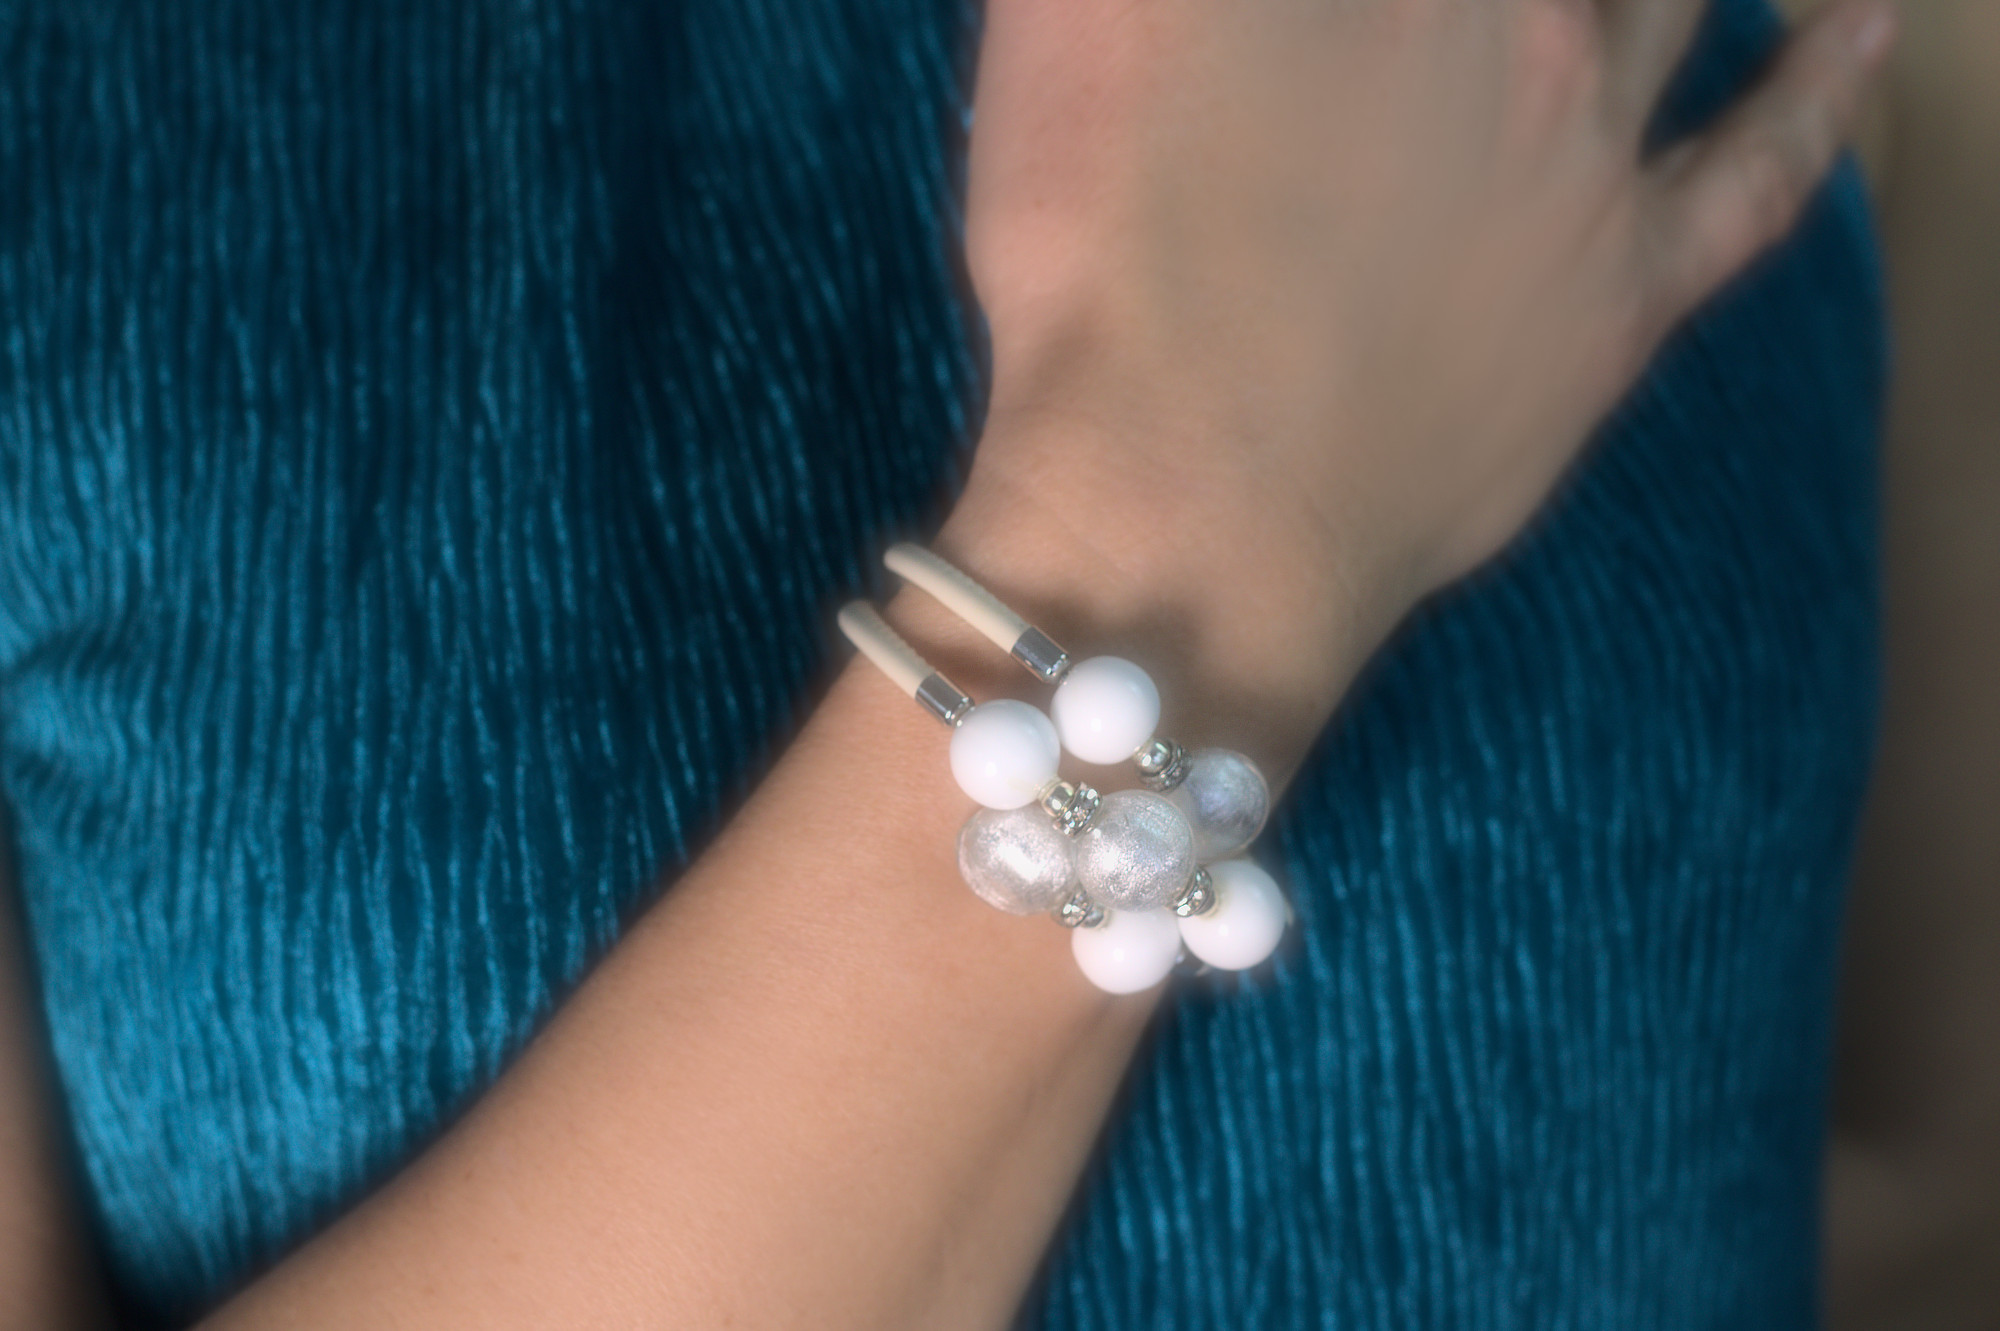 Bracelet of white leather and white and silver infused Murano glass beads, triple wrap around wrist